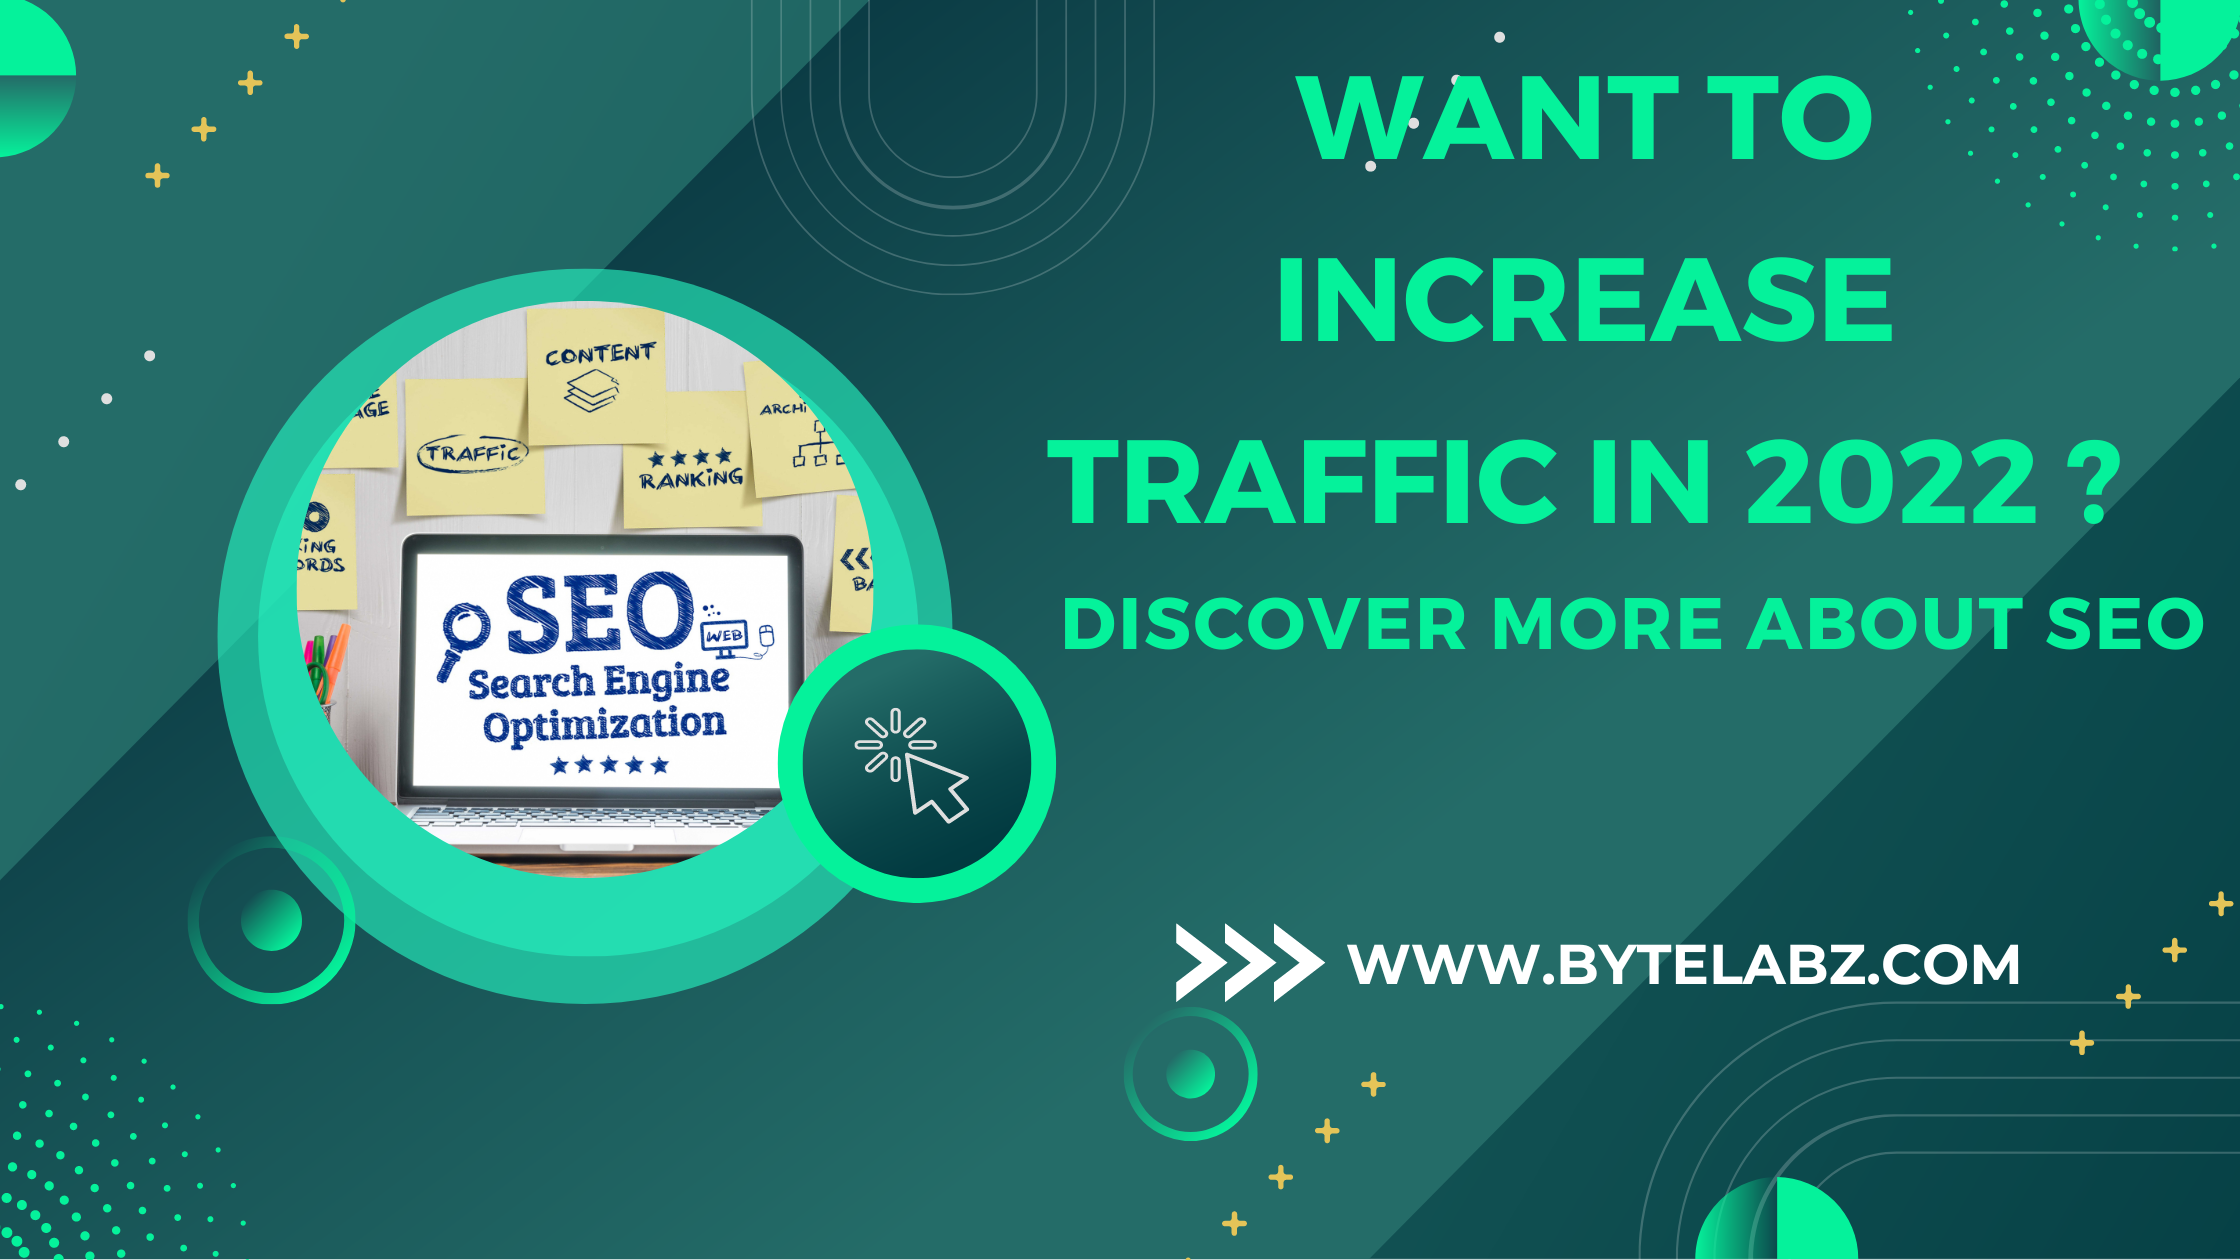 Want to Increase Traffic in 2022? Discover More About SEO.